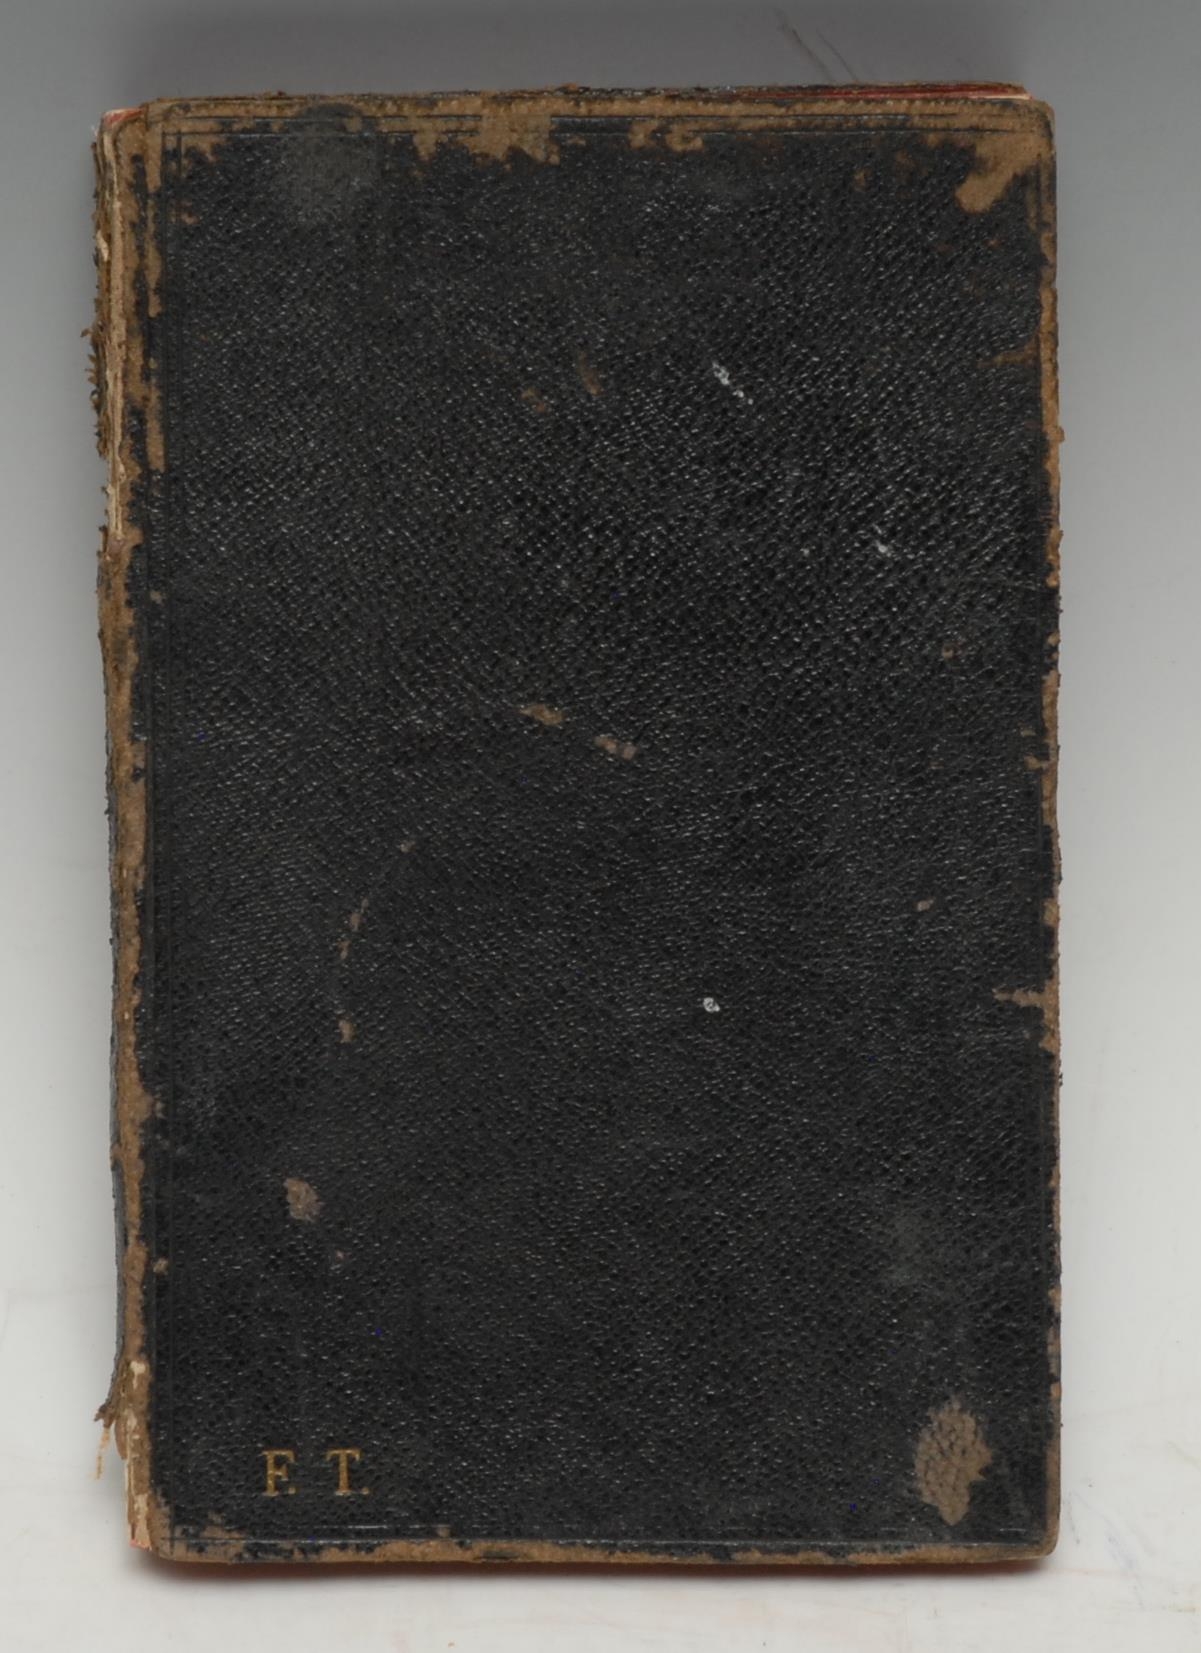 A 19th century common place book, Gleanings Both Wise & Otherwise Being the Common Place Book of